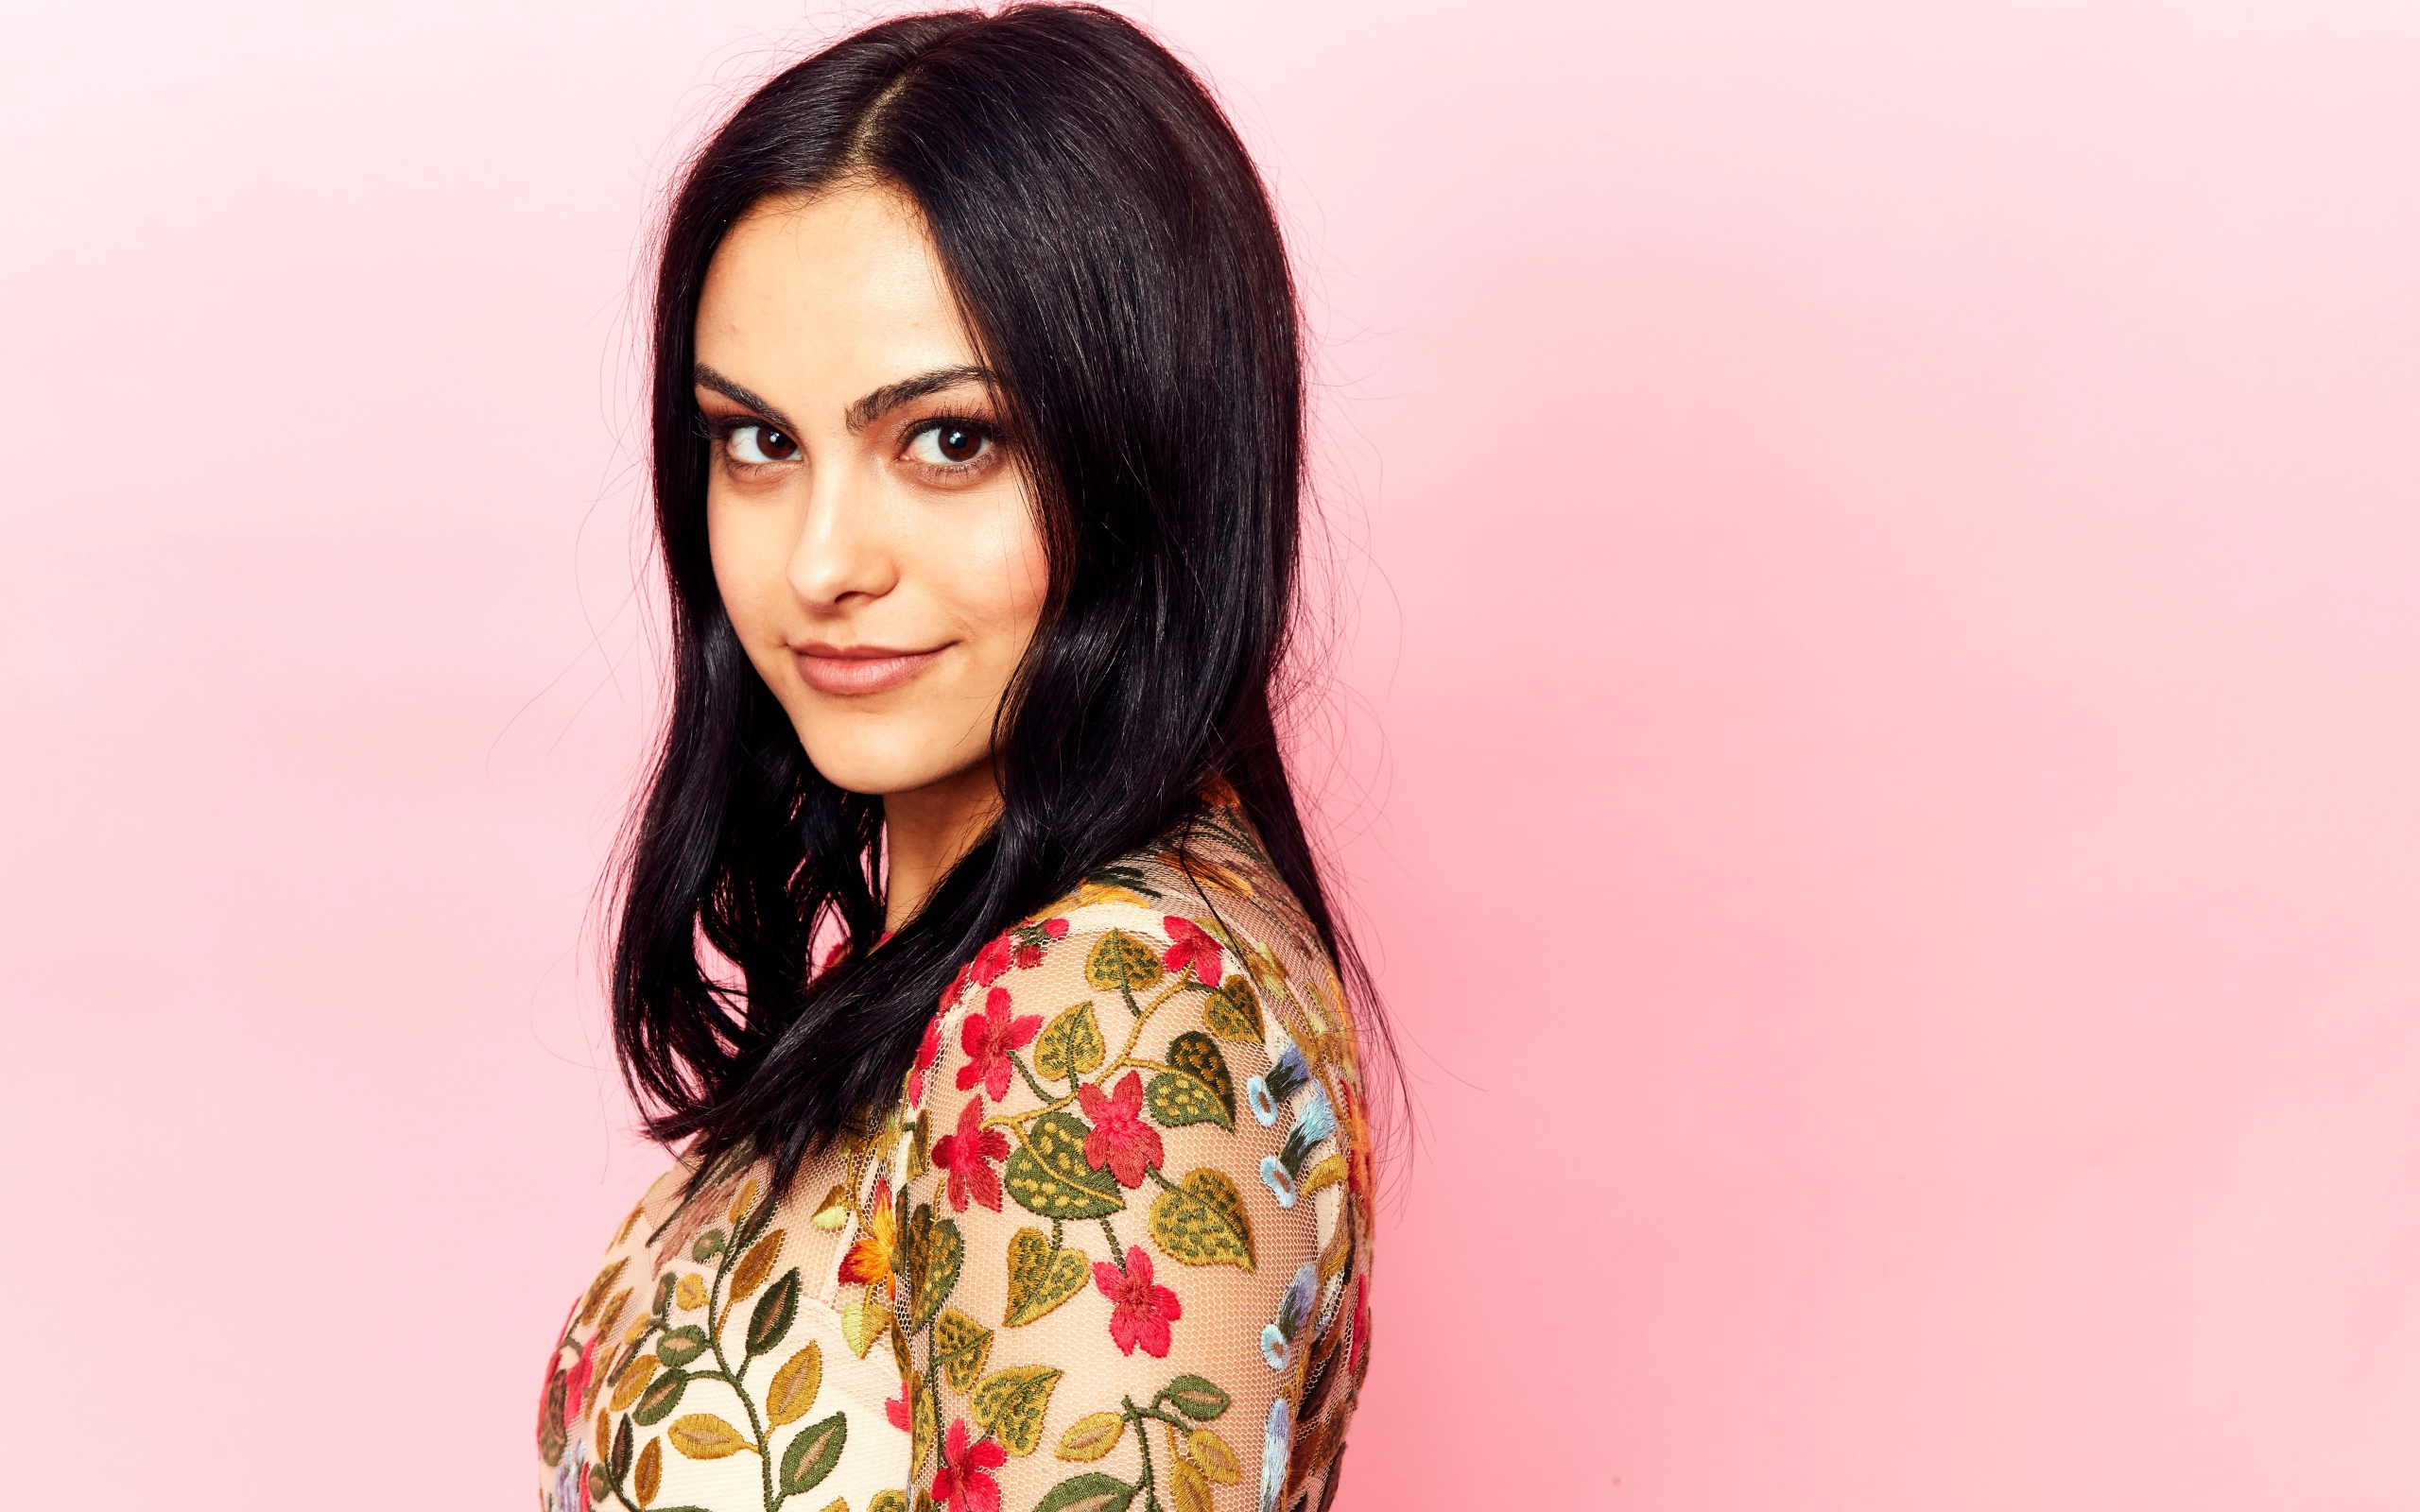 Young actress Camila Mendes photo on a pink background